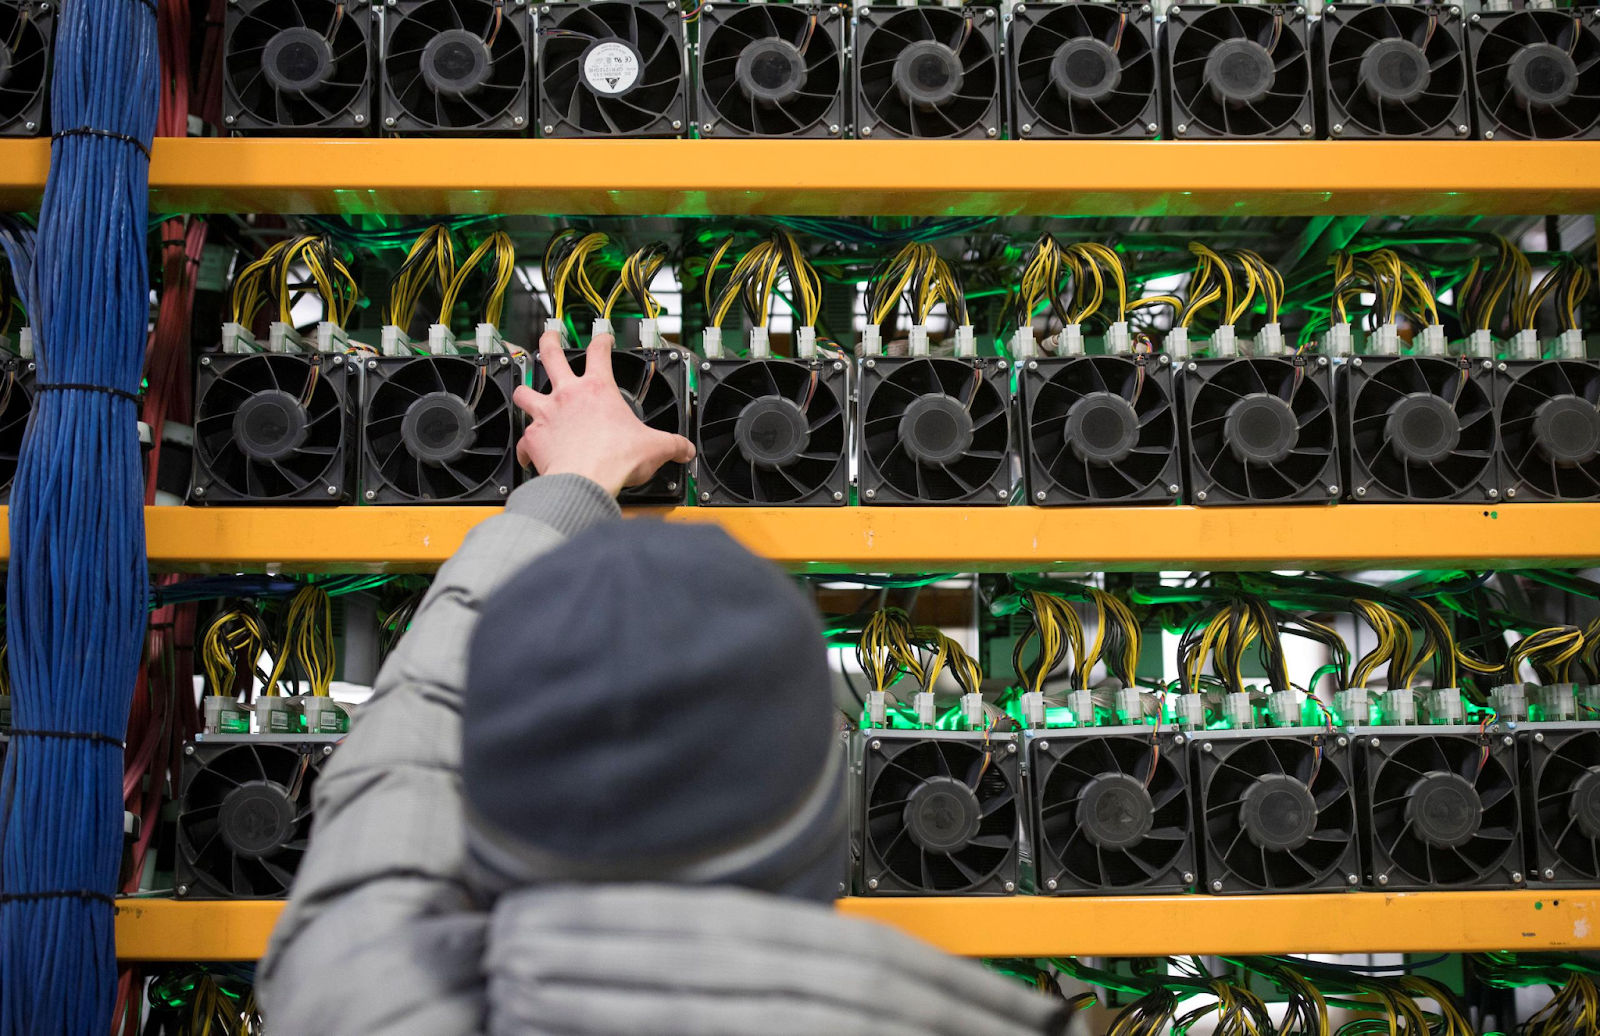 Staff member building a Bitcoin mining rig.